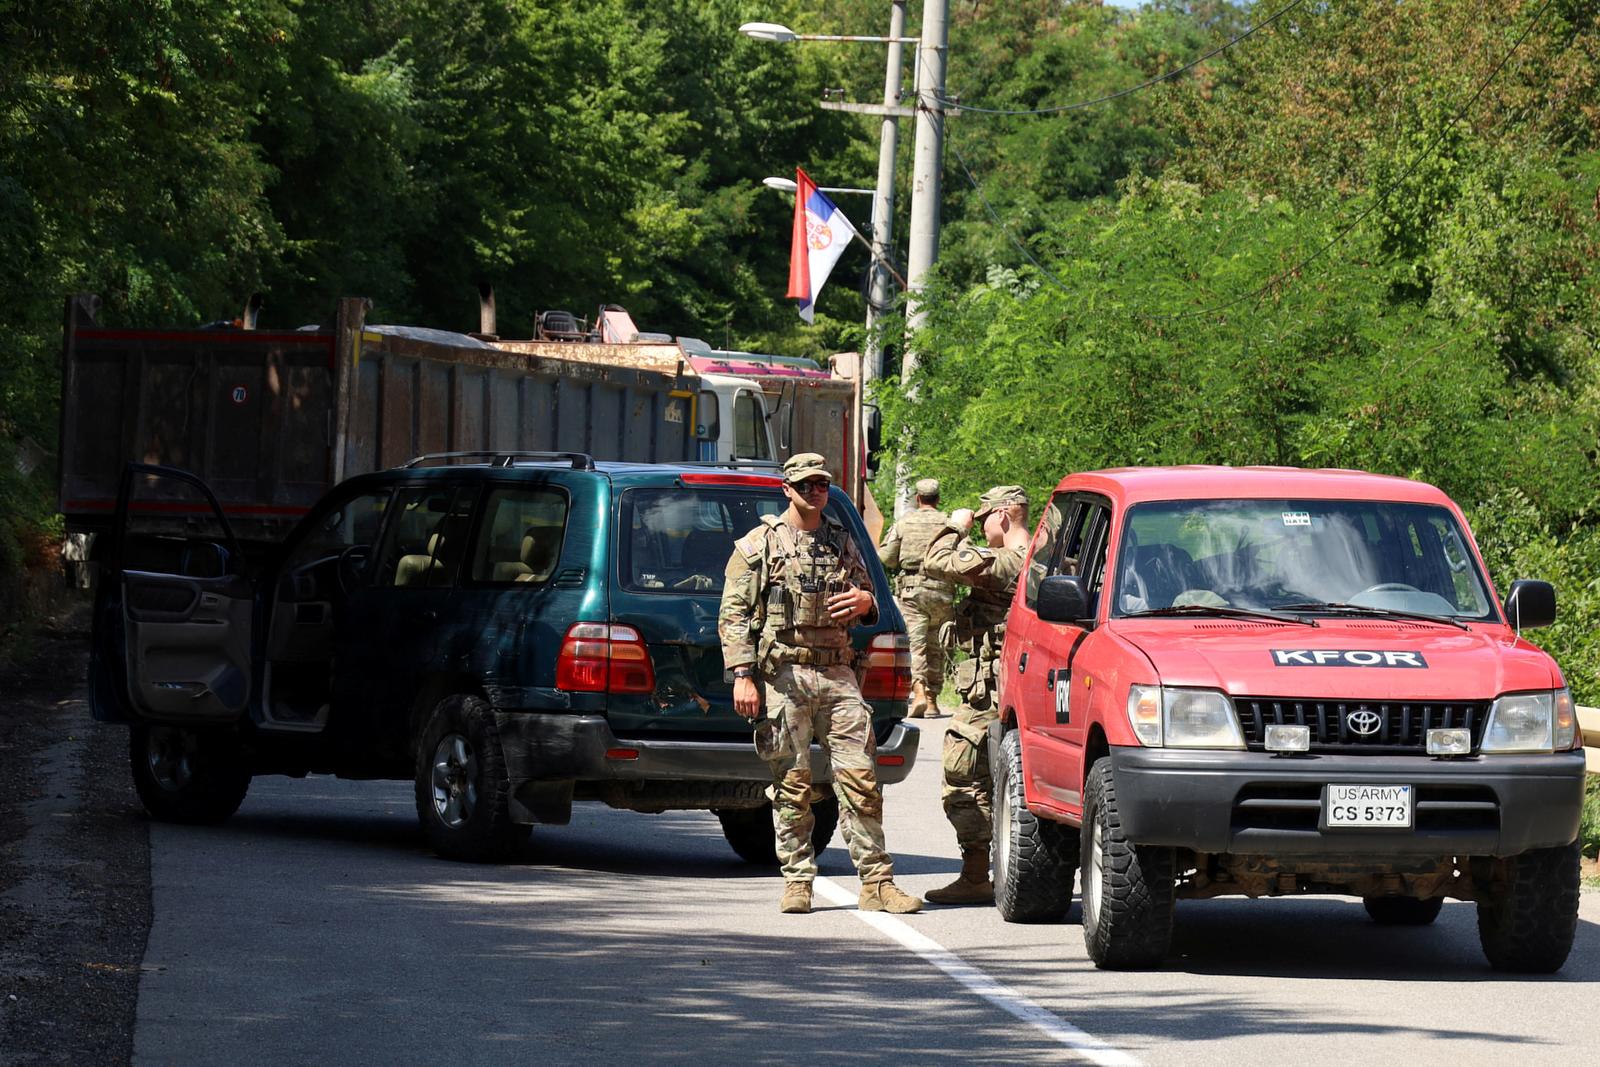 U.S. troops part of KFOR are seen as trucks block a road in Zupce, Kosovo August 1, 2022. REUTERS/Fatos Bytyci NO RESALES. NO ARCHIVES. Photo: Stringer/REUTERS